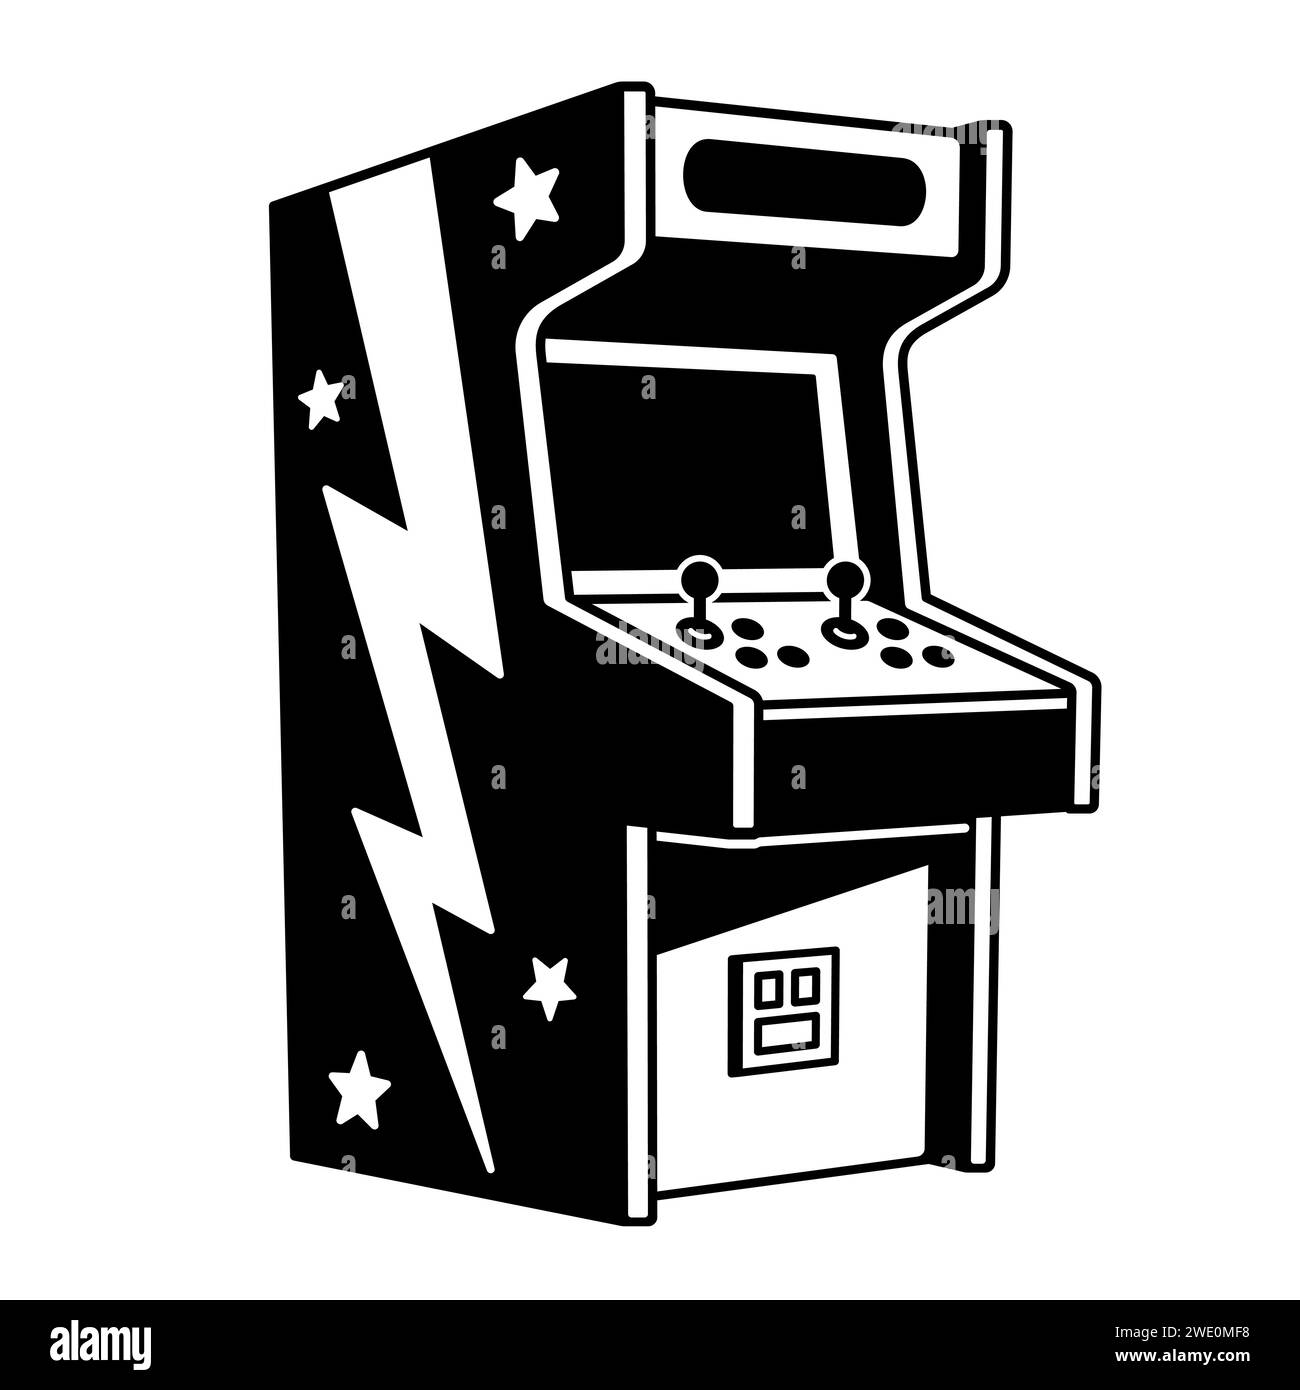 Classic 2 player arcade machine, black and white cartoon drawing. Vintage video game vector illustration. Stock Vector